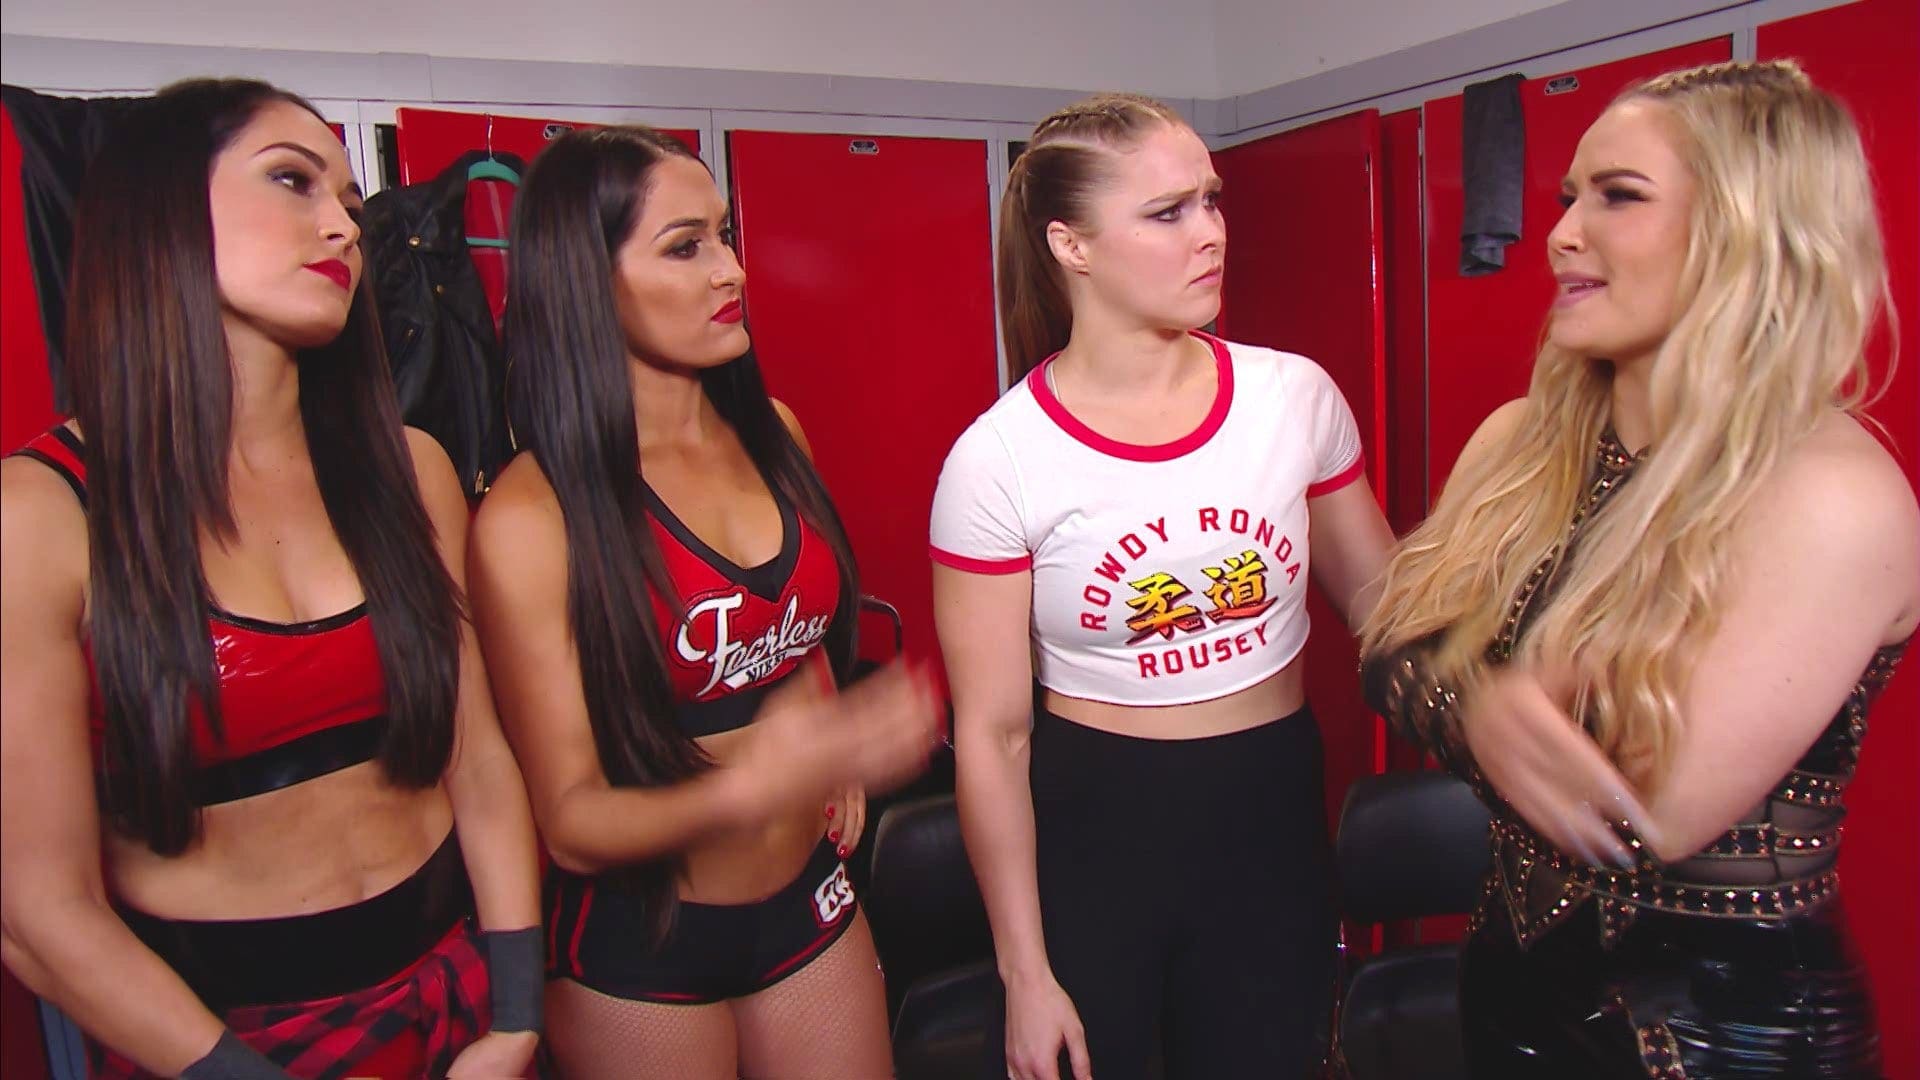 Who Knew About Ronda Rousey’s Possible WWE Exit?